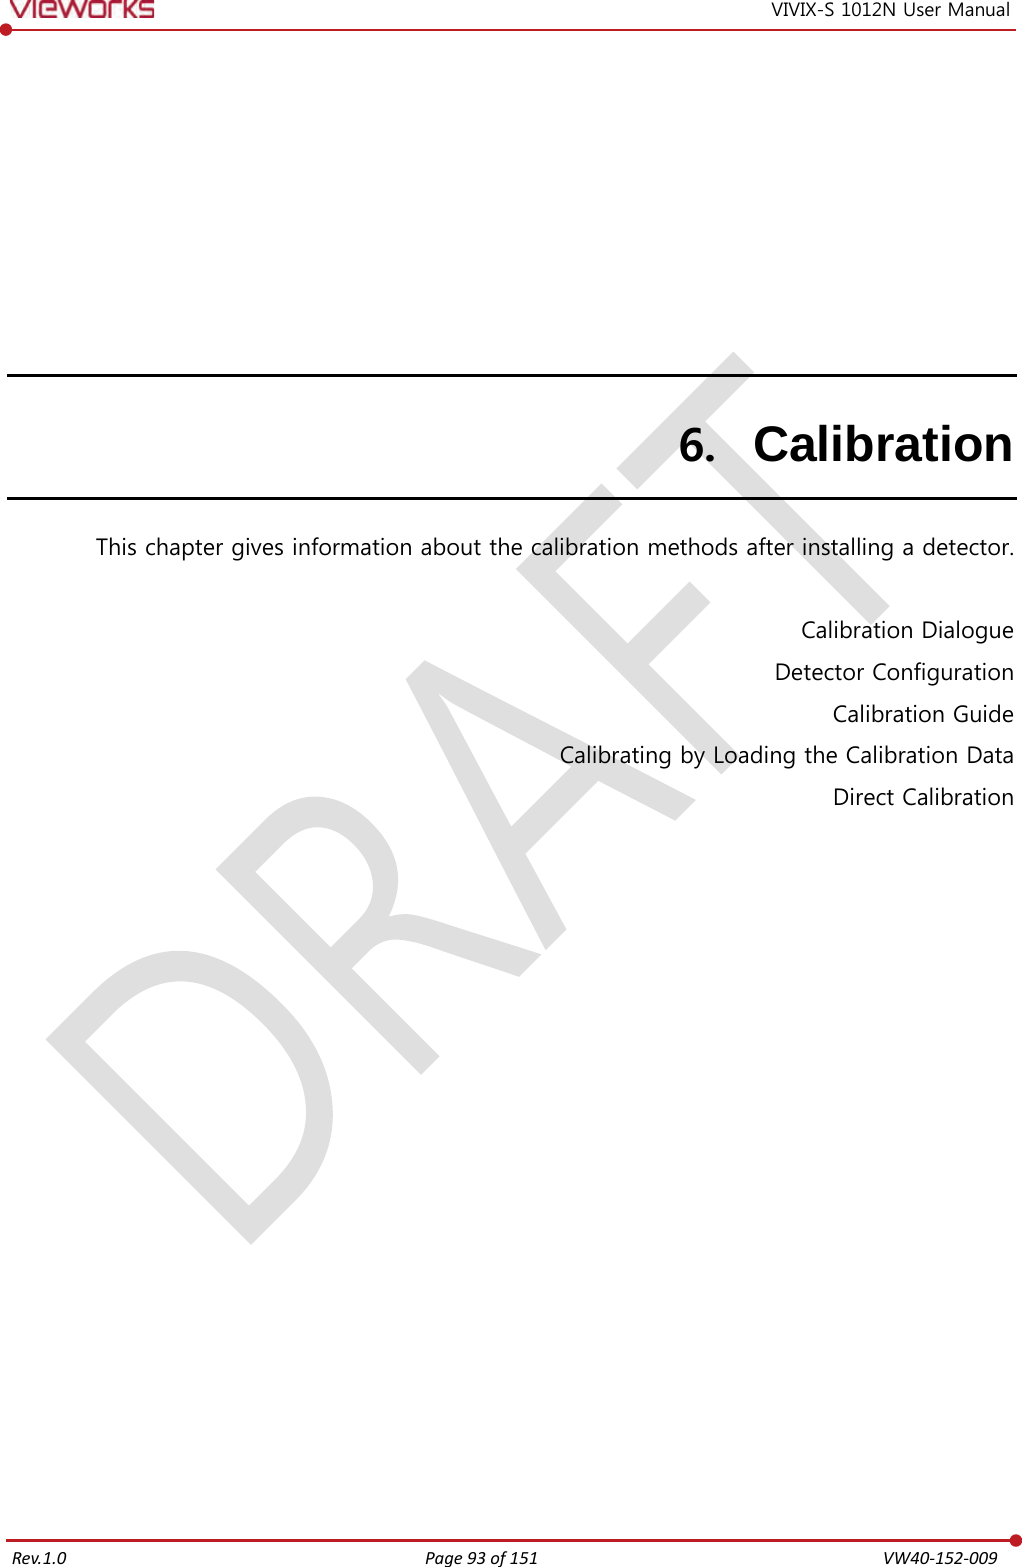   Rev.1.0 Page 93 of 151  VW40-152-009 VIVIX-S 1012N User Manual 6. Calibration This chapter gives information about the calibration methods after installing a detector.  Calibration Dialogue Detector Configuration Calibration Guide Calibrating by Loading the Calibration Data Direct Calibration   